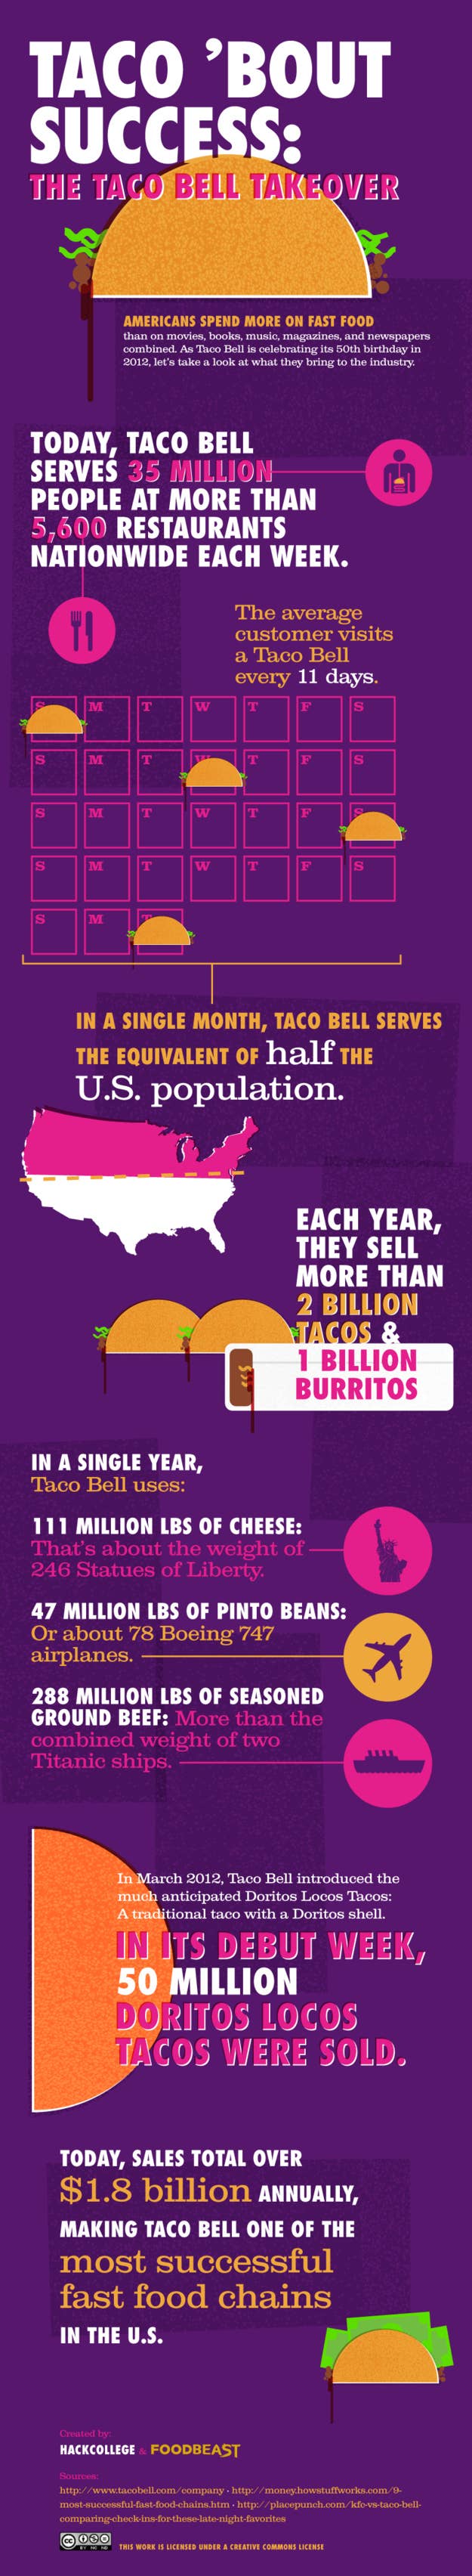 Taco Bell Yearly Ground Beef Usage Equivalent To The Weight Of Two ...